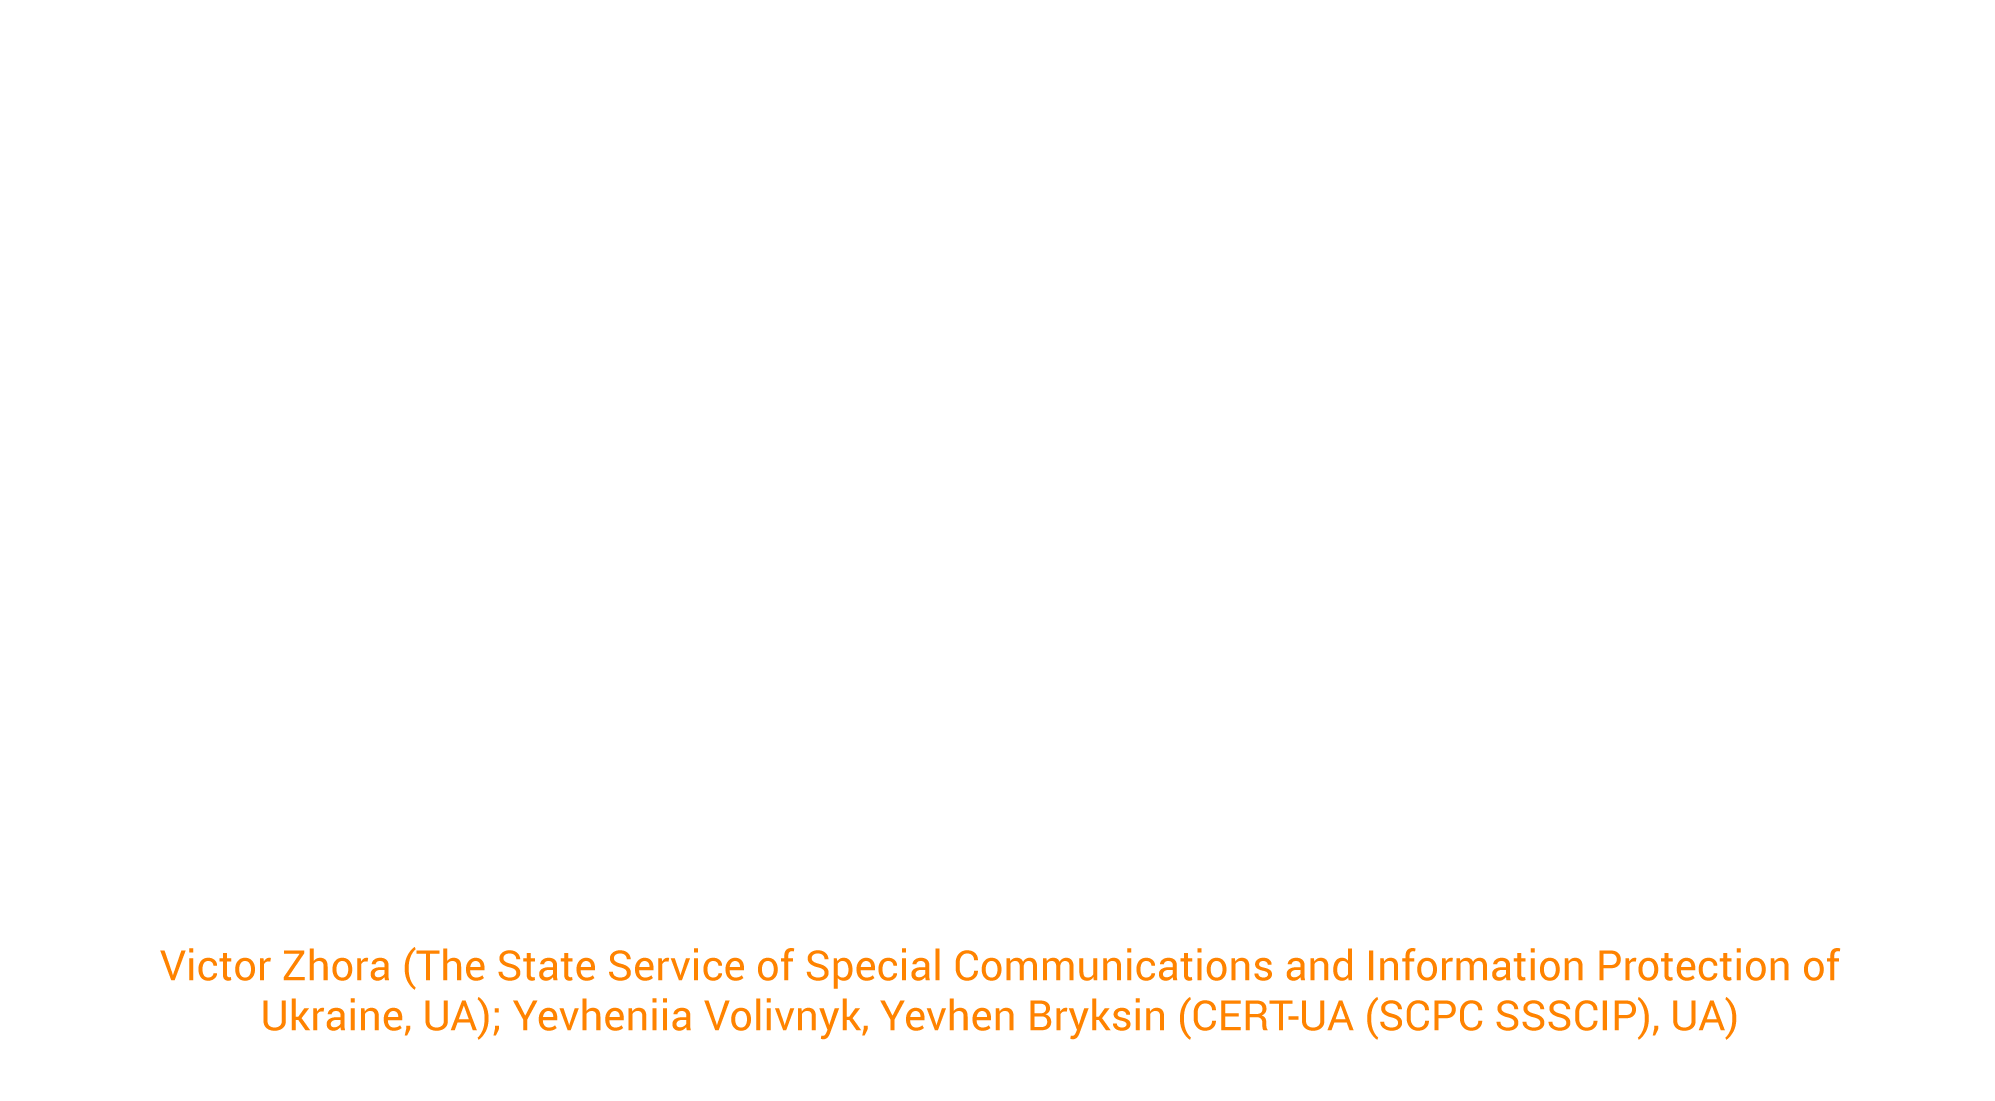 CERT-UA: Research and Technical Analysis of Large-Scale Cyber Attacks in Ukraine in 2021